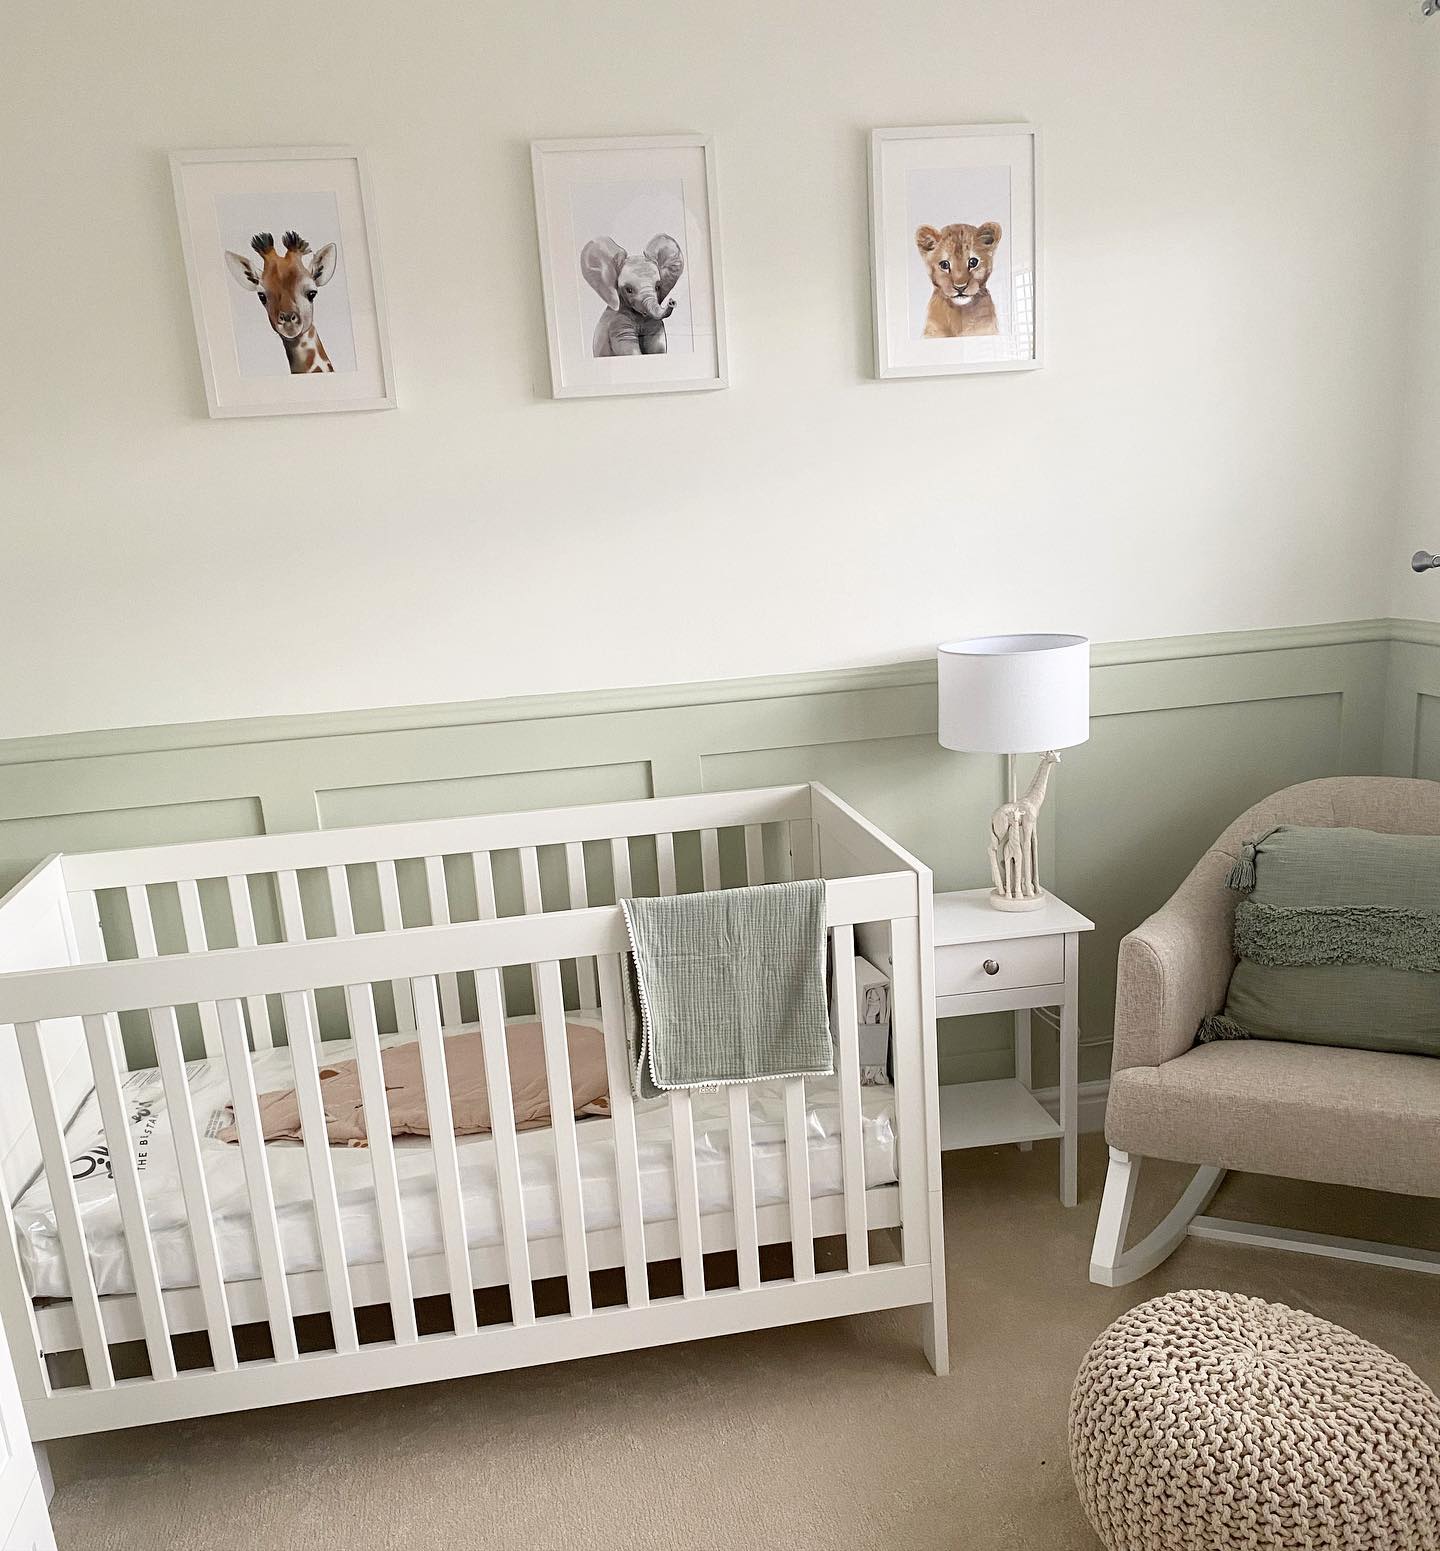 A sage green nursery with a white crib and animal pictures.